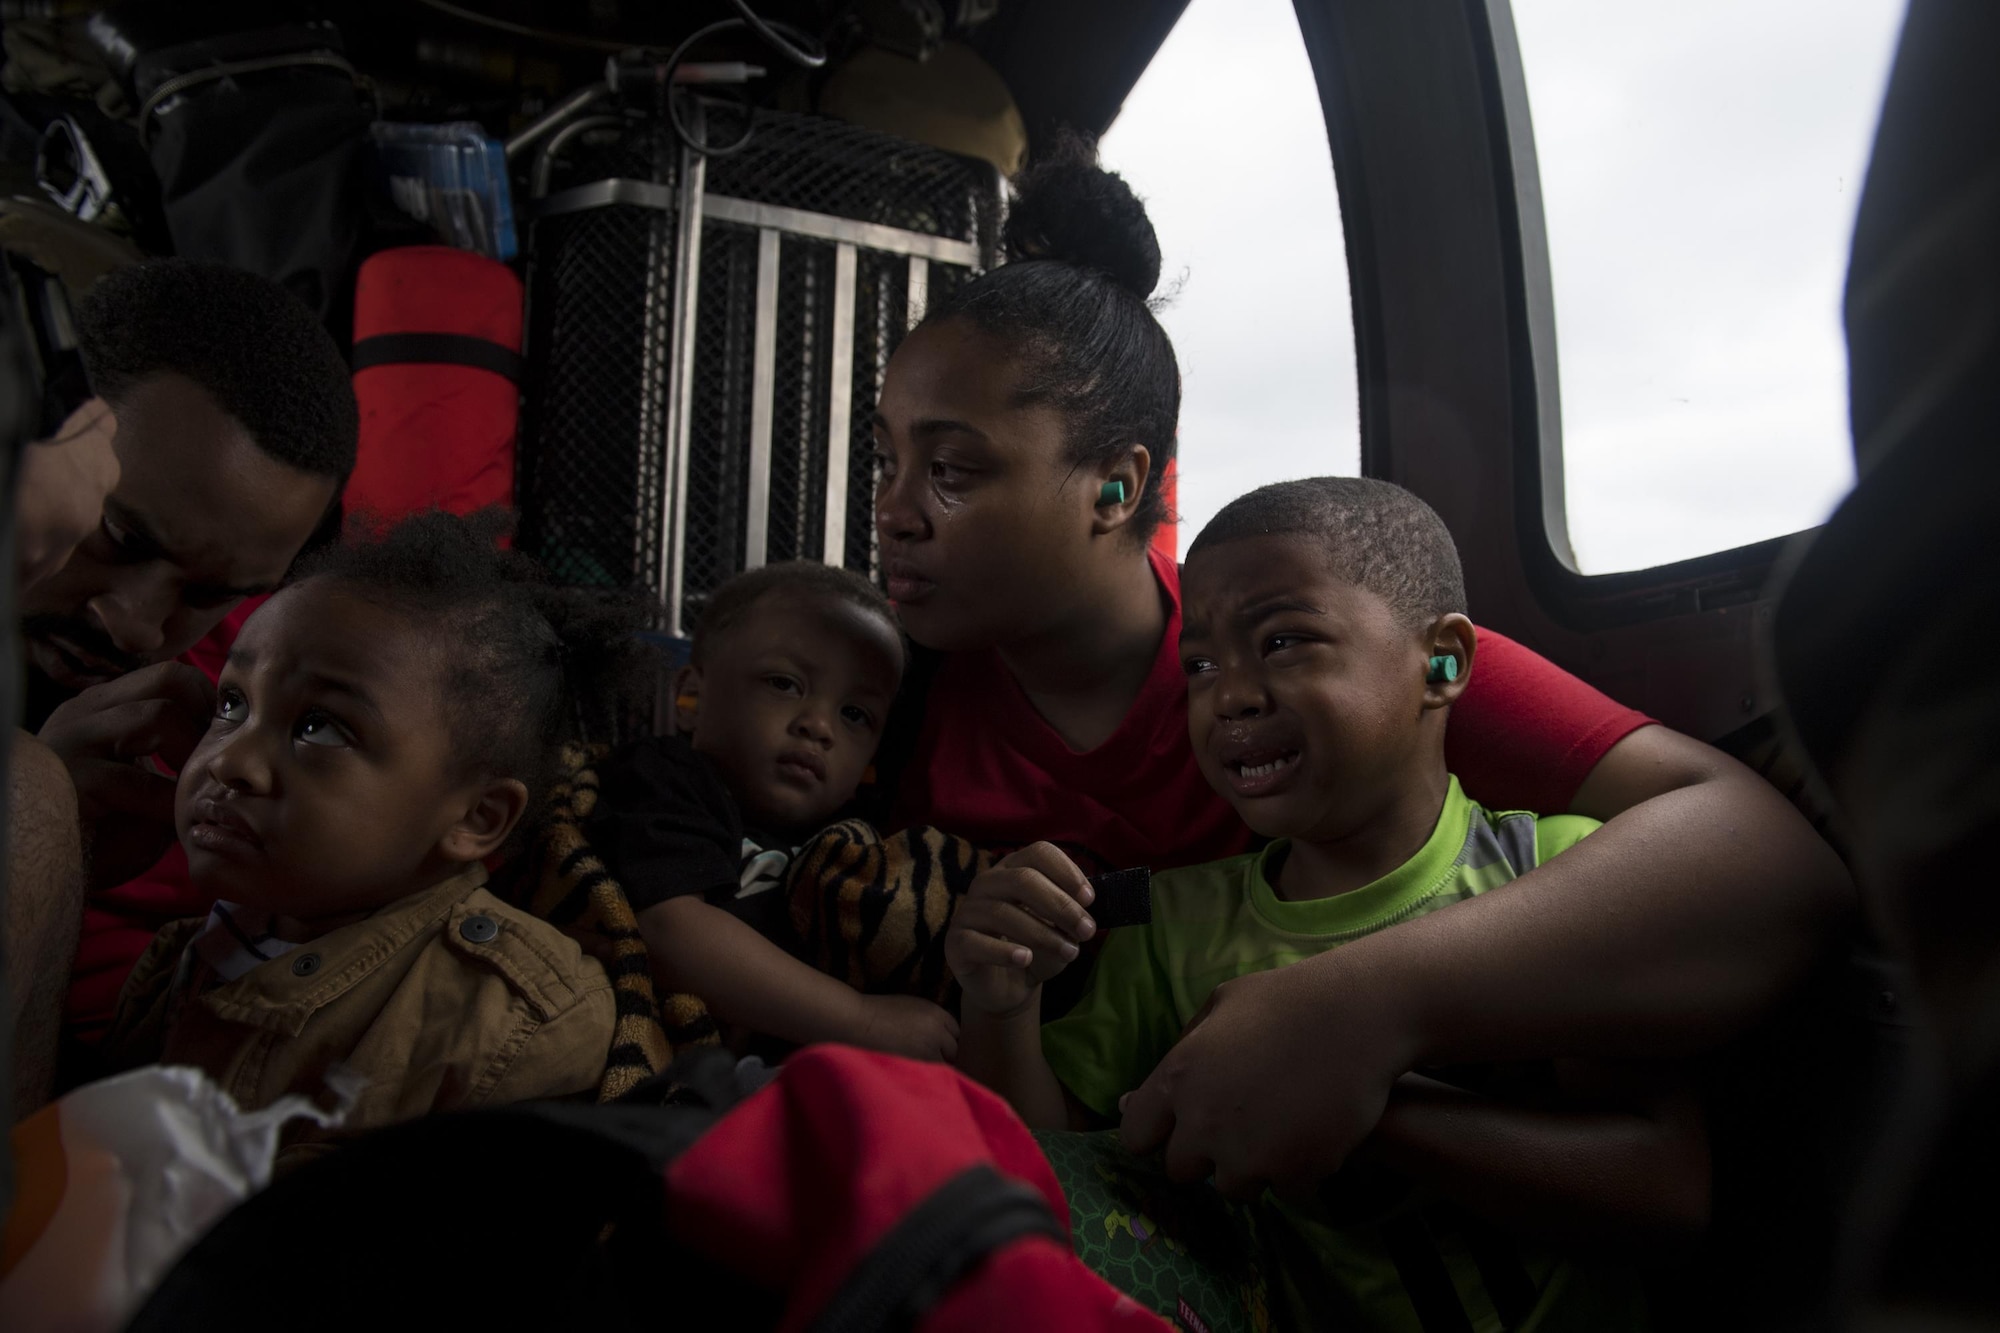 A family of evacuees wait for the rest of their family members onboard an HH-60G Pave Hawk, assigned to the 41st Rescue Squadron, Aug. 30, 2017, over a residence in the Houston, Texas area.